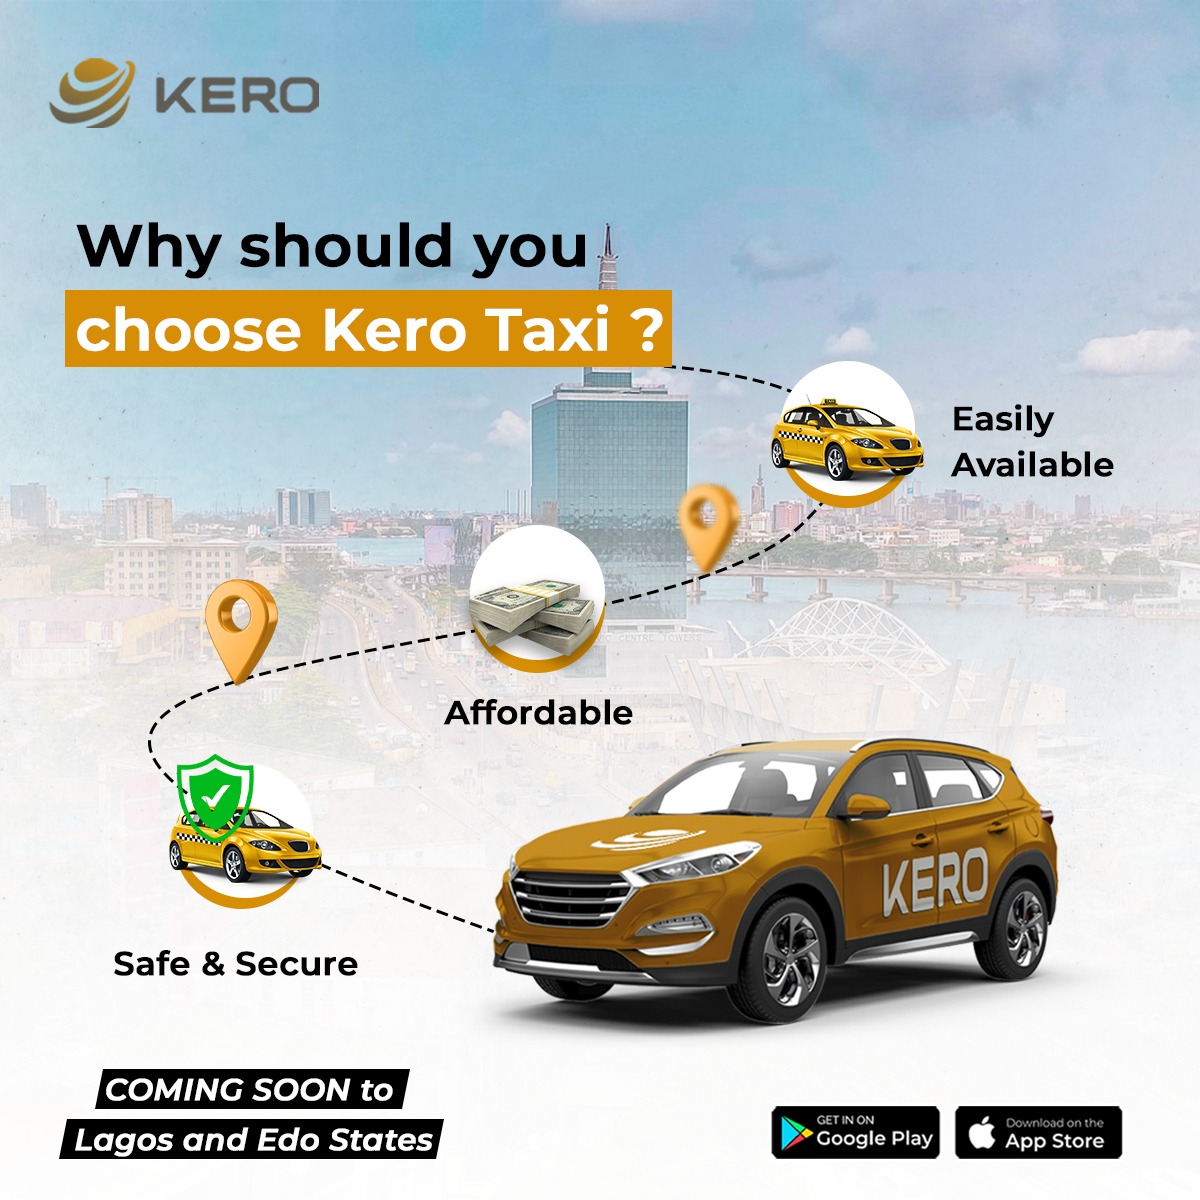 Looking for an affordable, safe, and easily available ride🚕? Choose Kero Taxi today and enjoy a hassle-free journey😍! Visit for more information - kerotechnologies.com #kero #nigeria #lagosbusiness #taxiservice #driver #blackbusinessowner #taxidermyart #Edo #business